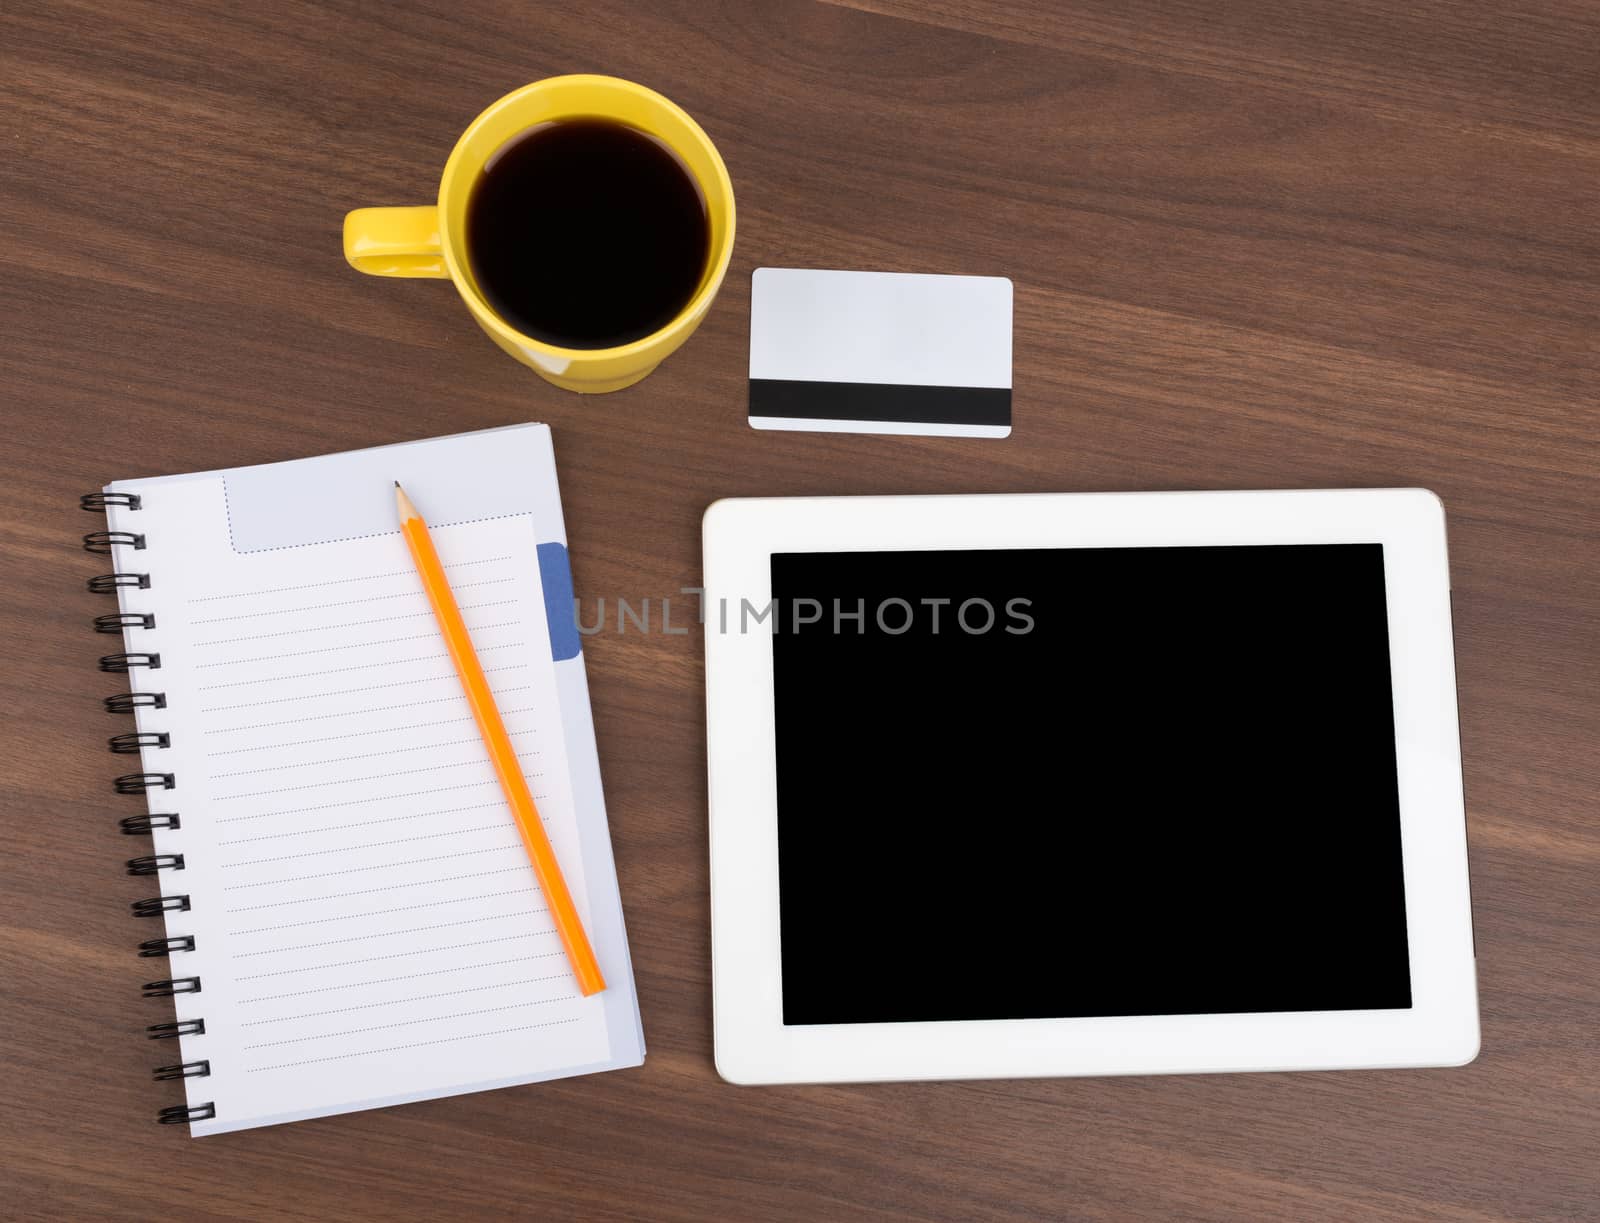 Blank copybook with tablet and empty card on wooden table